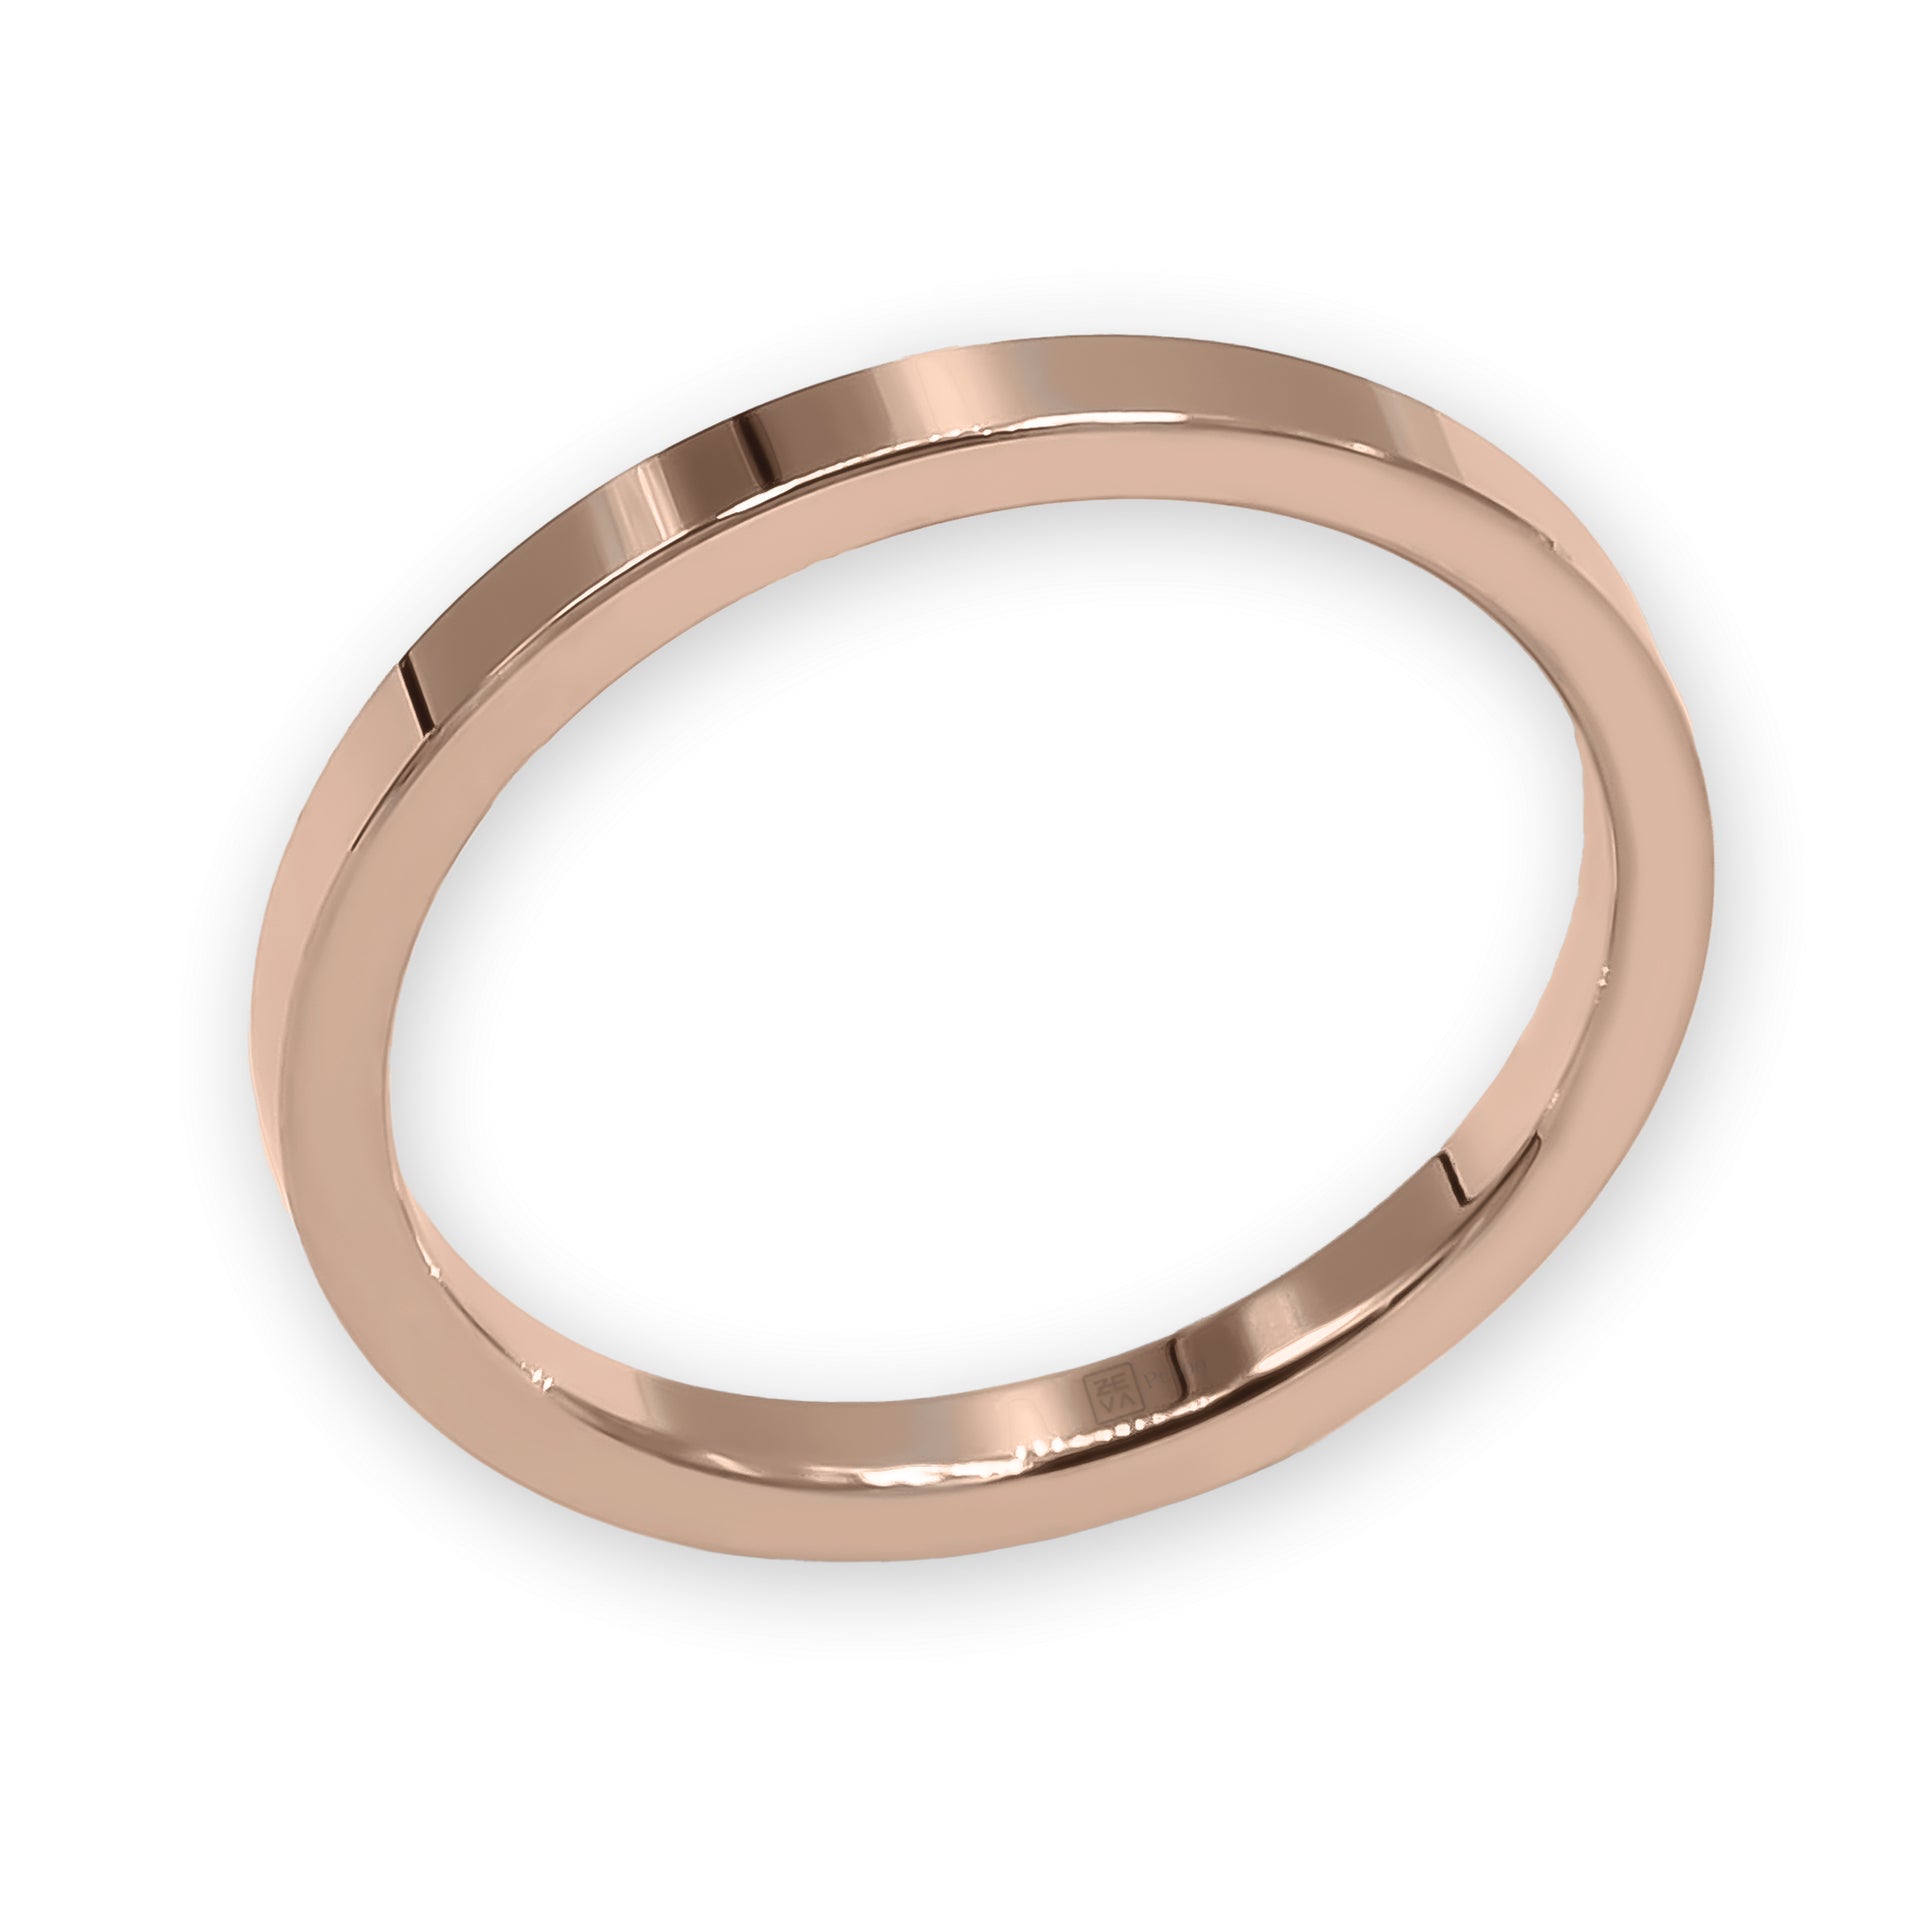 Bague EARTH IS ROUND 2mm profil plat or rouge 18k